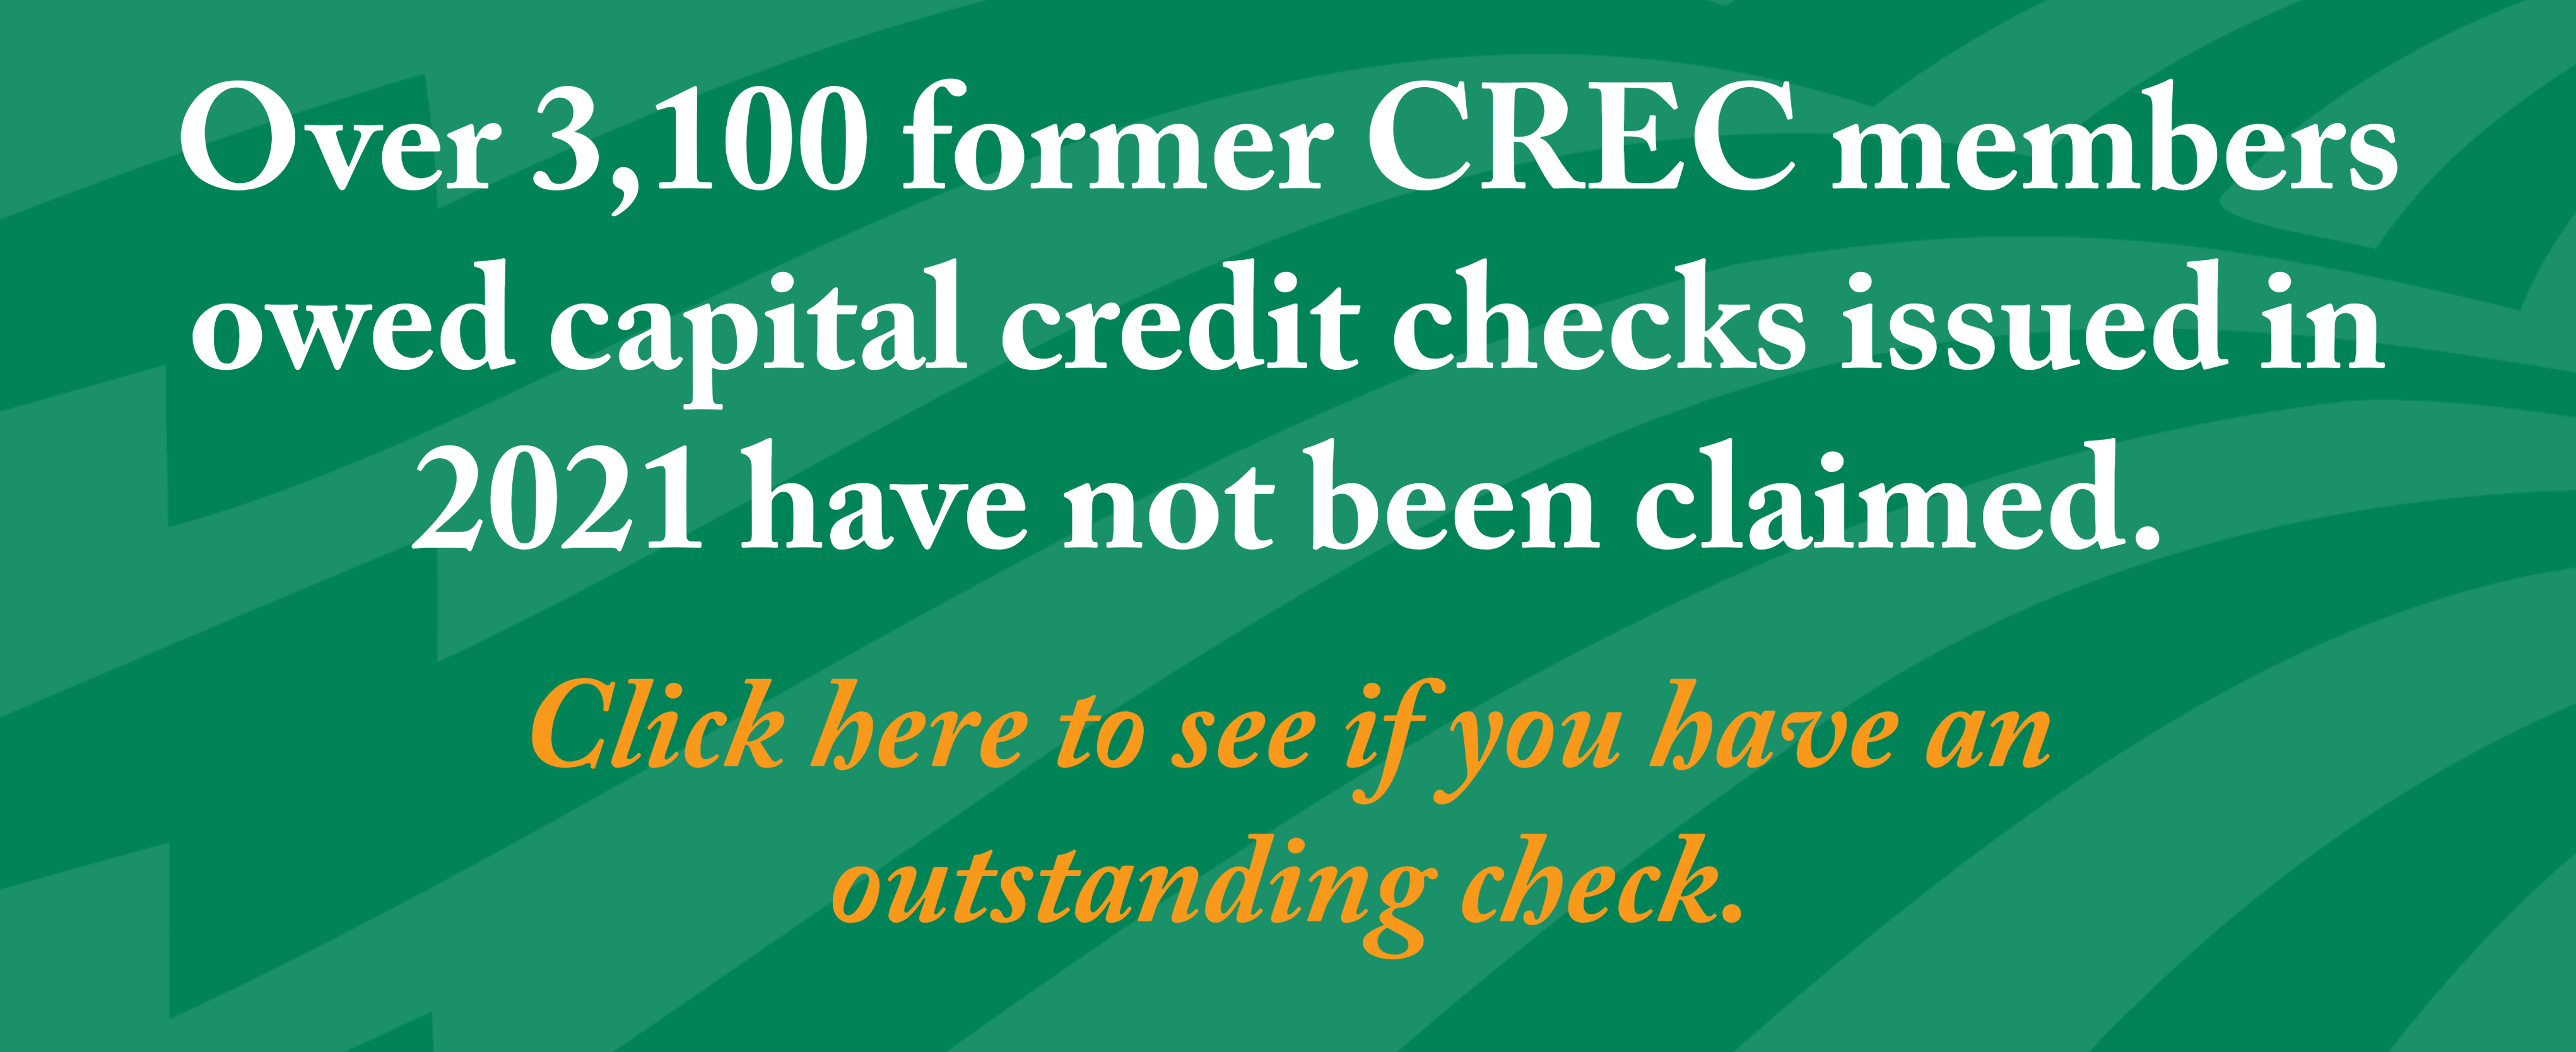 Over 3,100 former CREC members owed capital credit checks issued in 2021 have not been claimed.